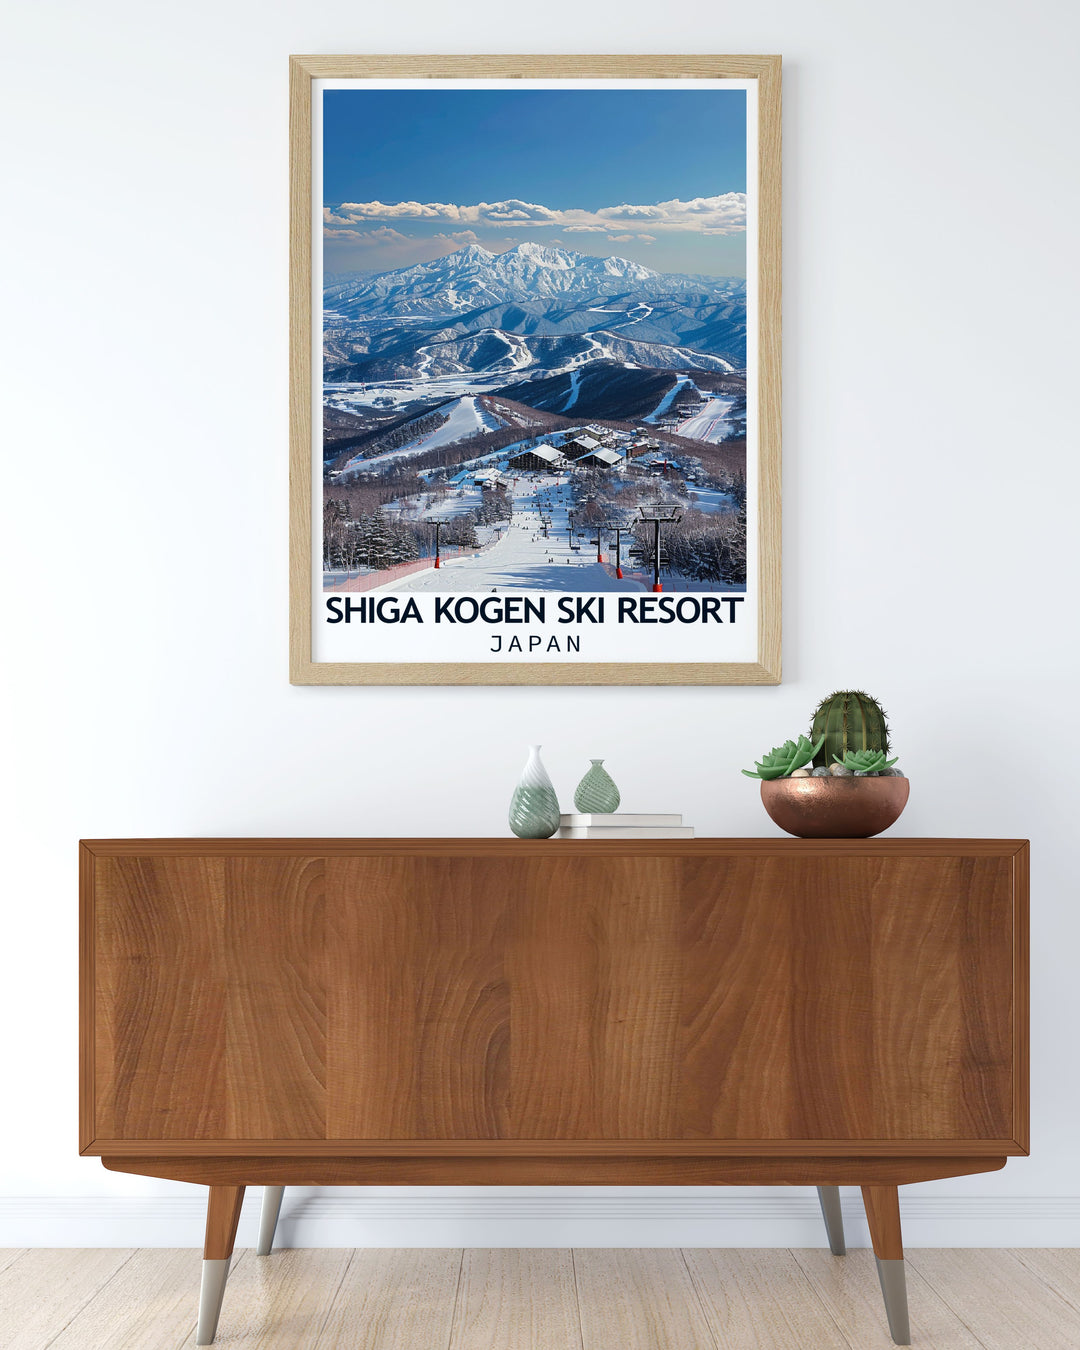 Featuring the majestic Japanese Alps, this poster showcases the serene yet thrilling landscape of Shiga Kogen, inviting viewers to explore the natural beauty and adventure of Nagano, Japan.